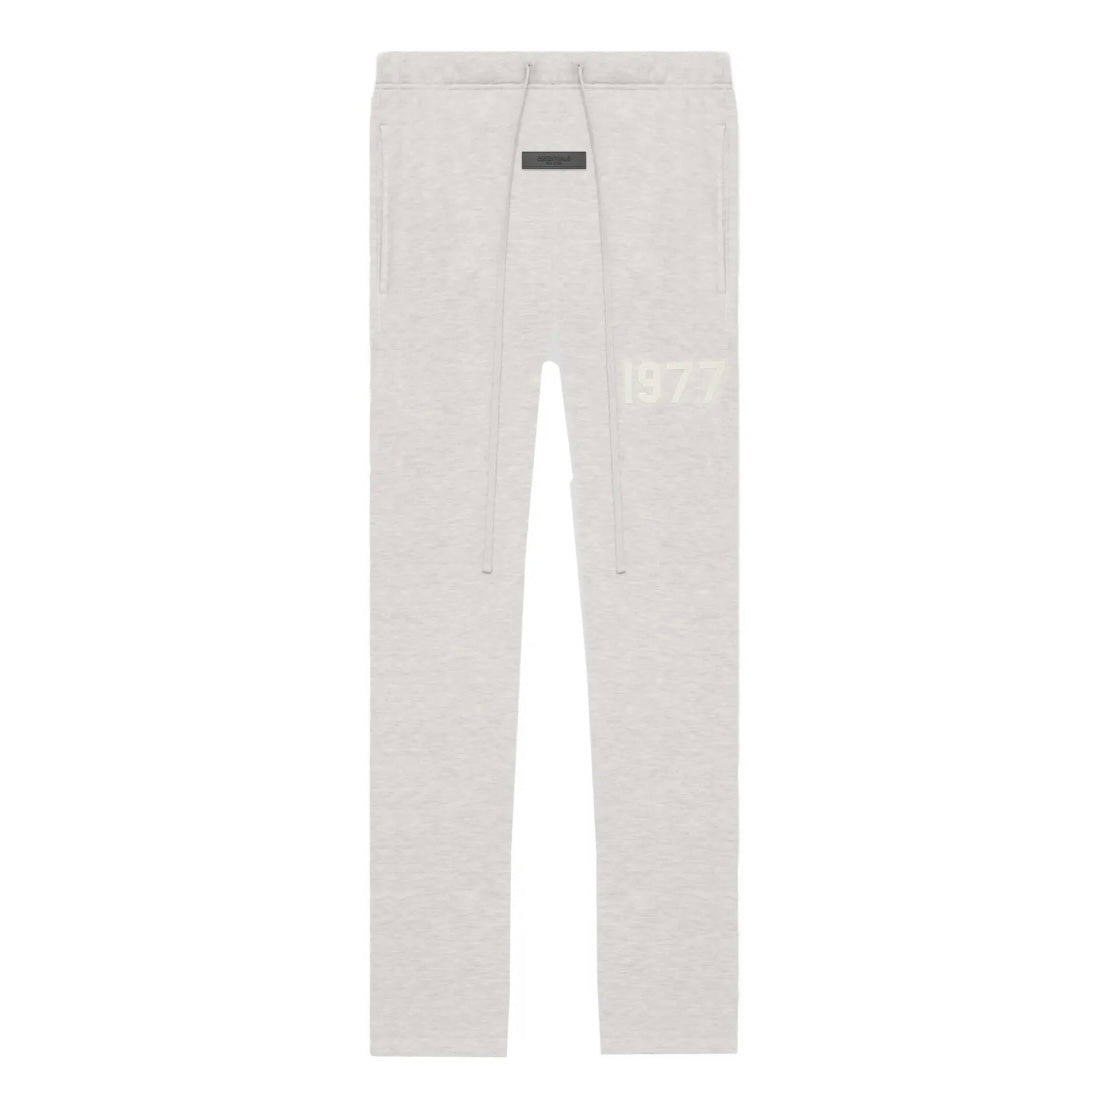 Fear of God Essentials Relaxed "1977" Sweatpants Light Oatmeal